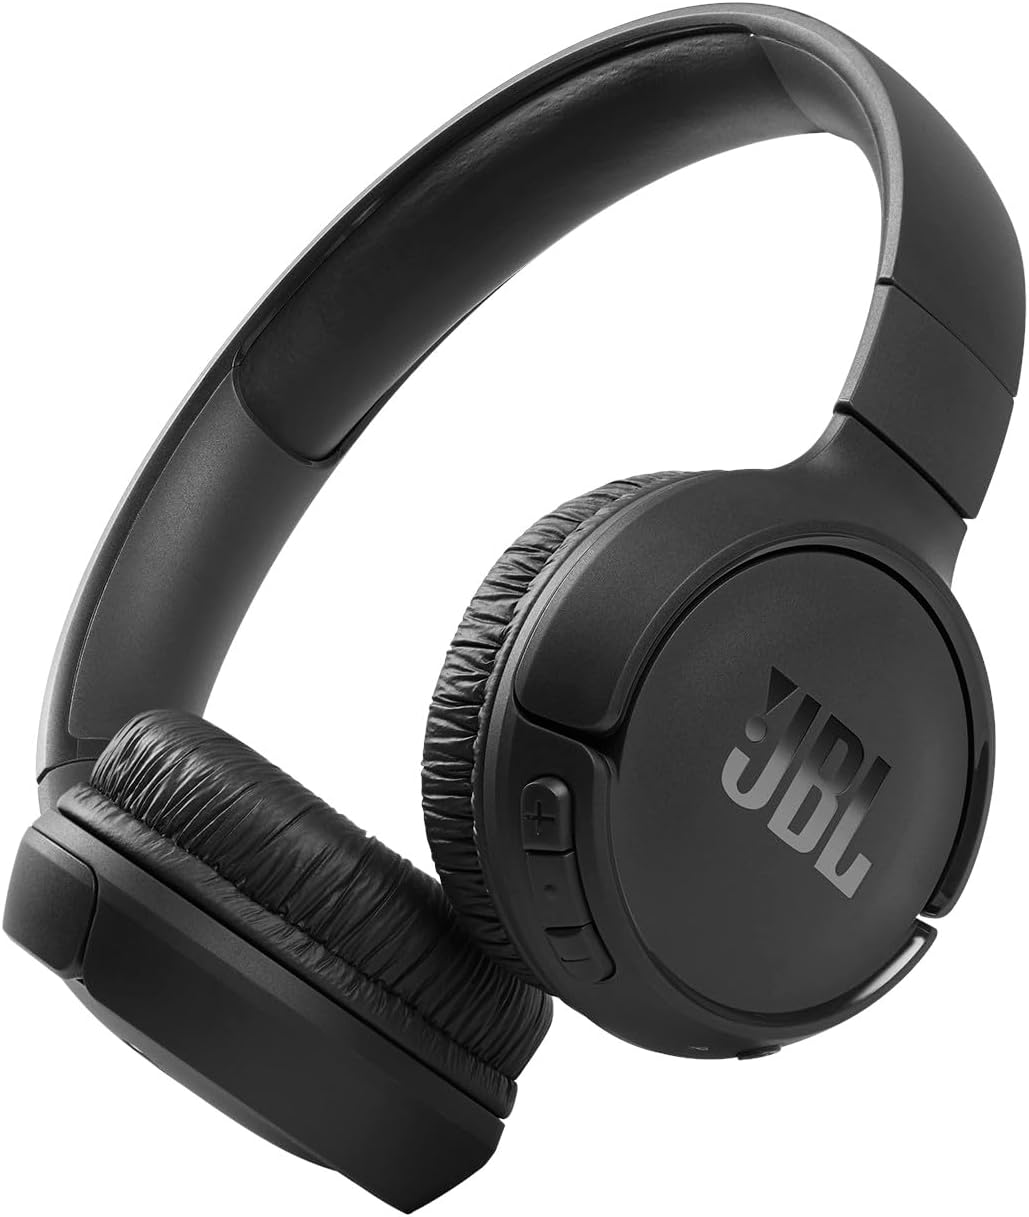 Limited-time deal: JBL Tune 510BT: Wireless On-Ear Headphones with Purebass Sound - Black - $24.95 @ Amazon